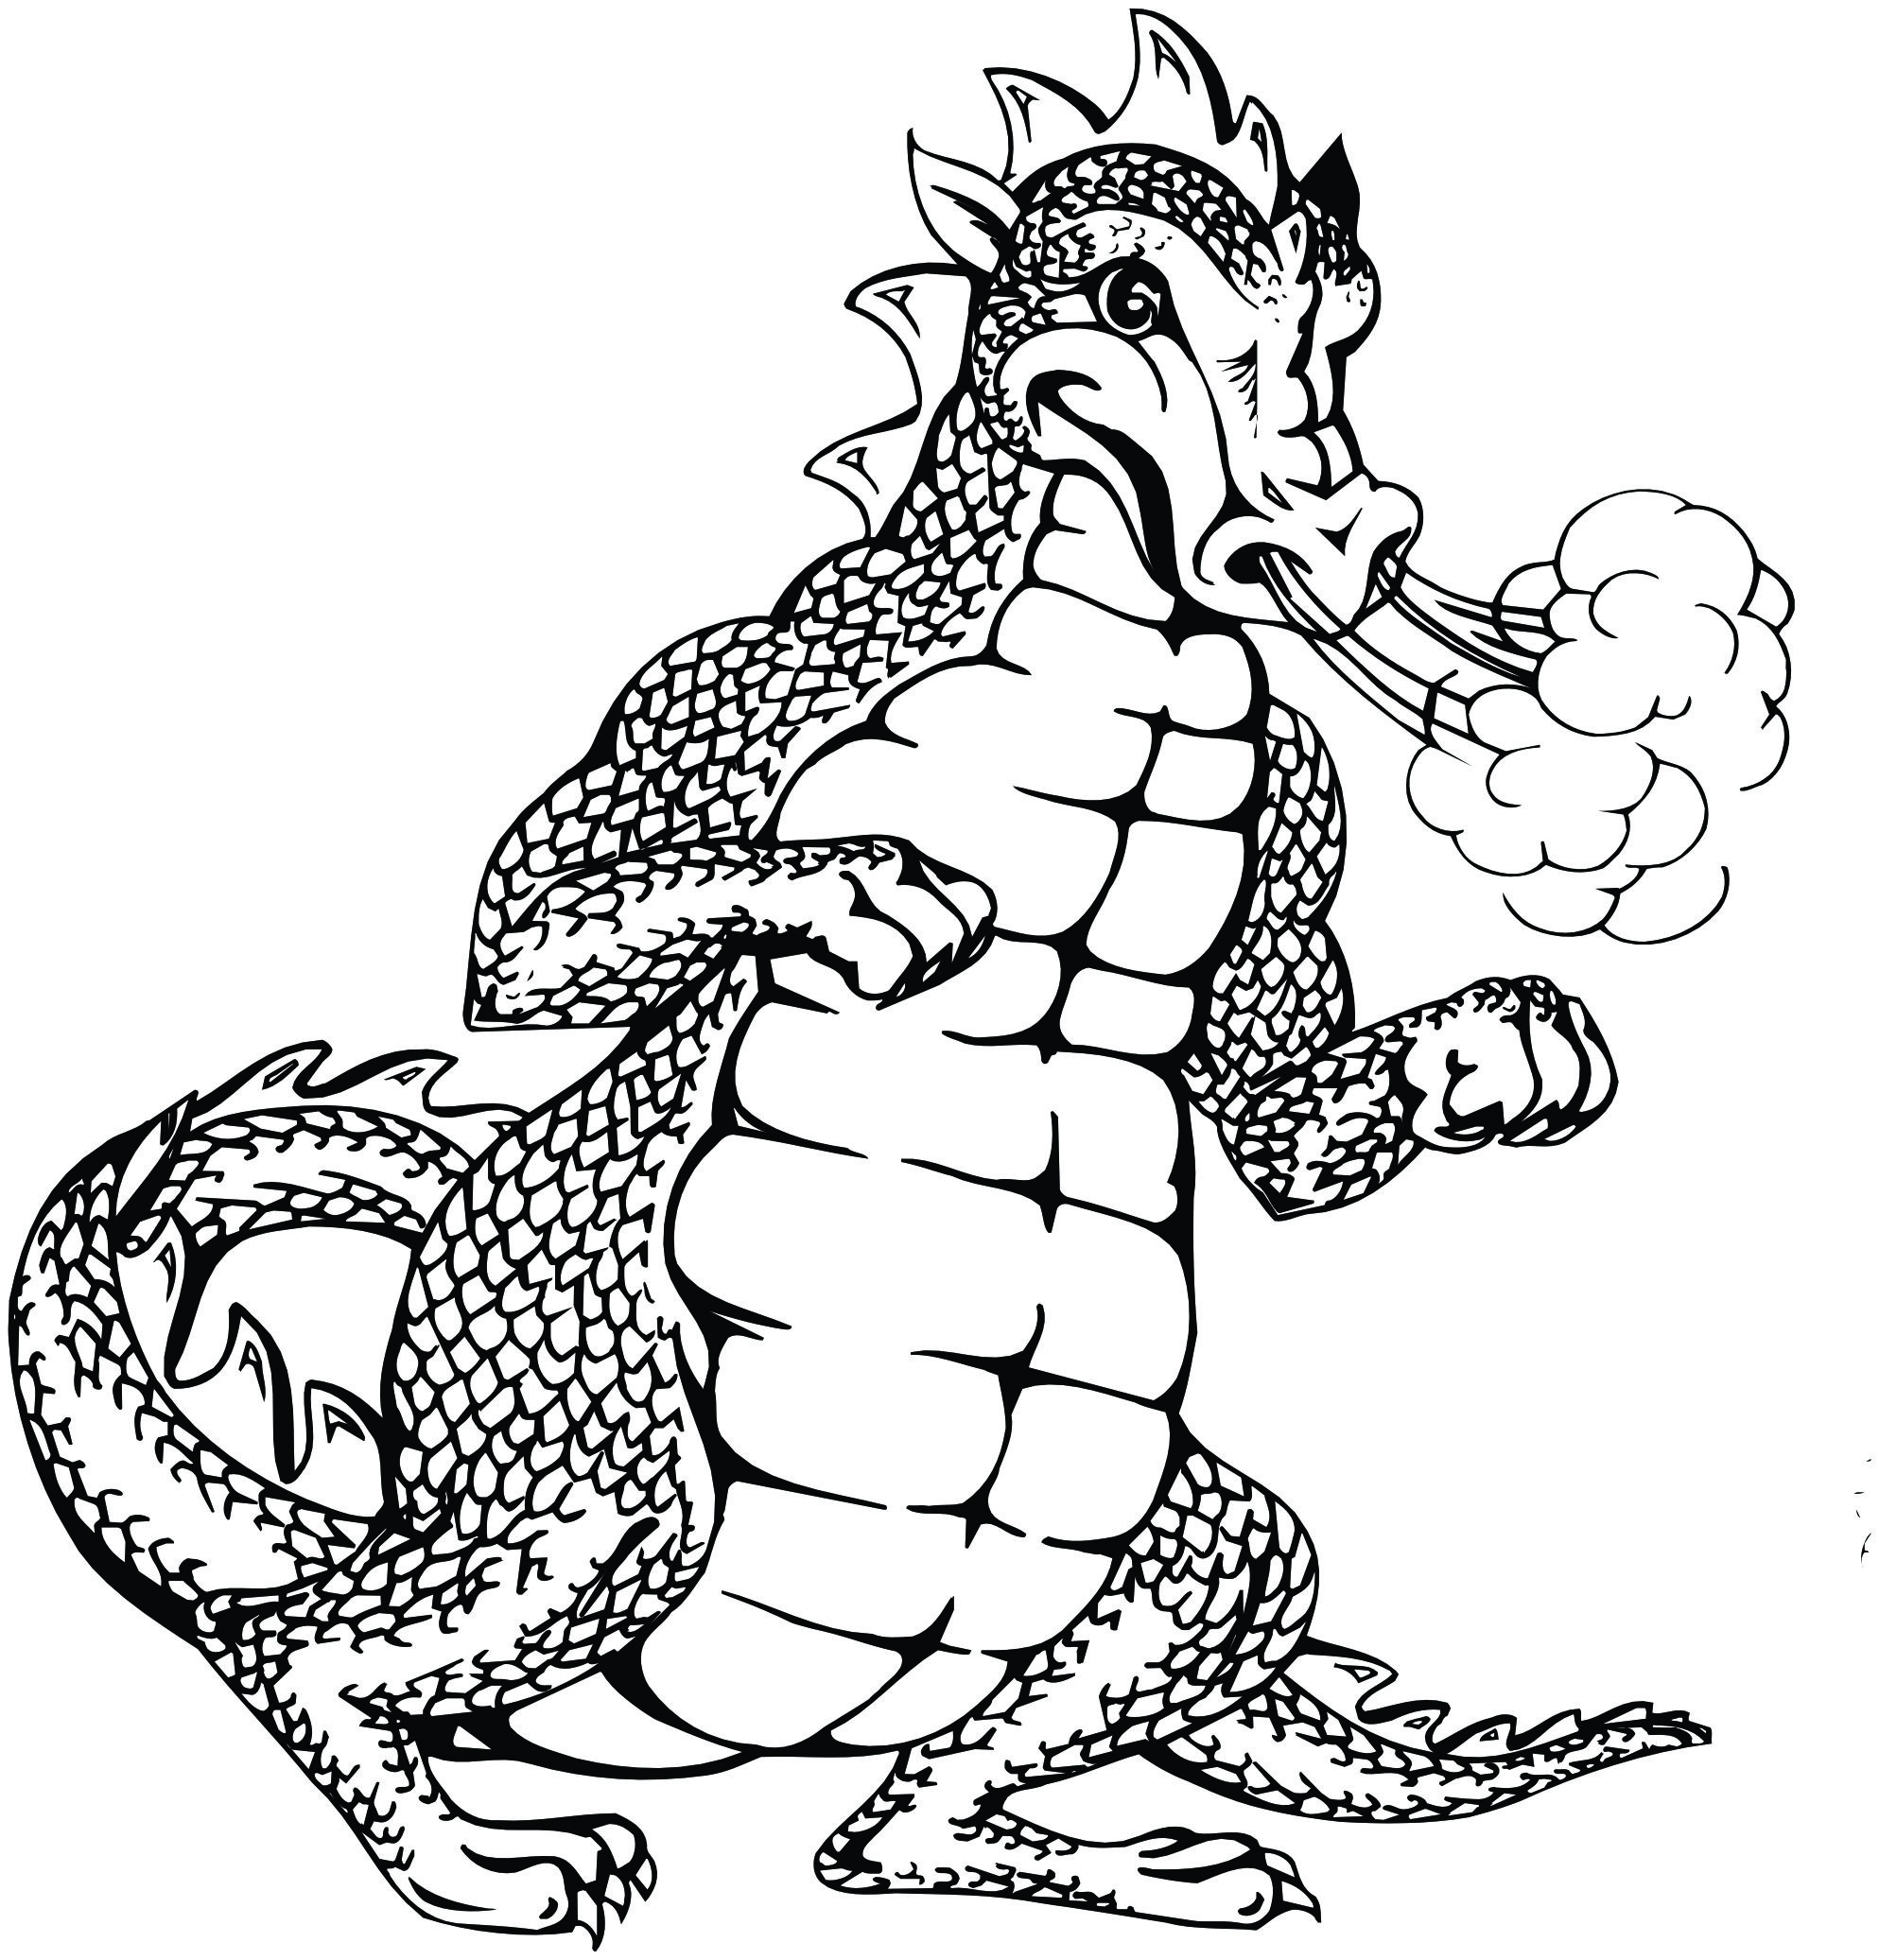 Cool Pictures Of Dragons In Black And White Images & Pictures - Becuo